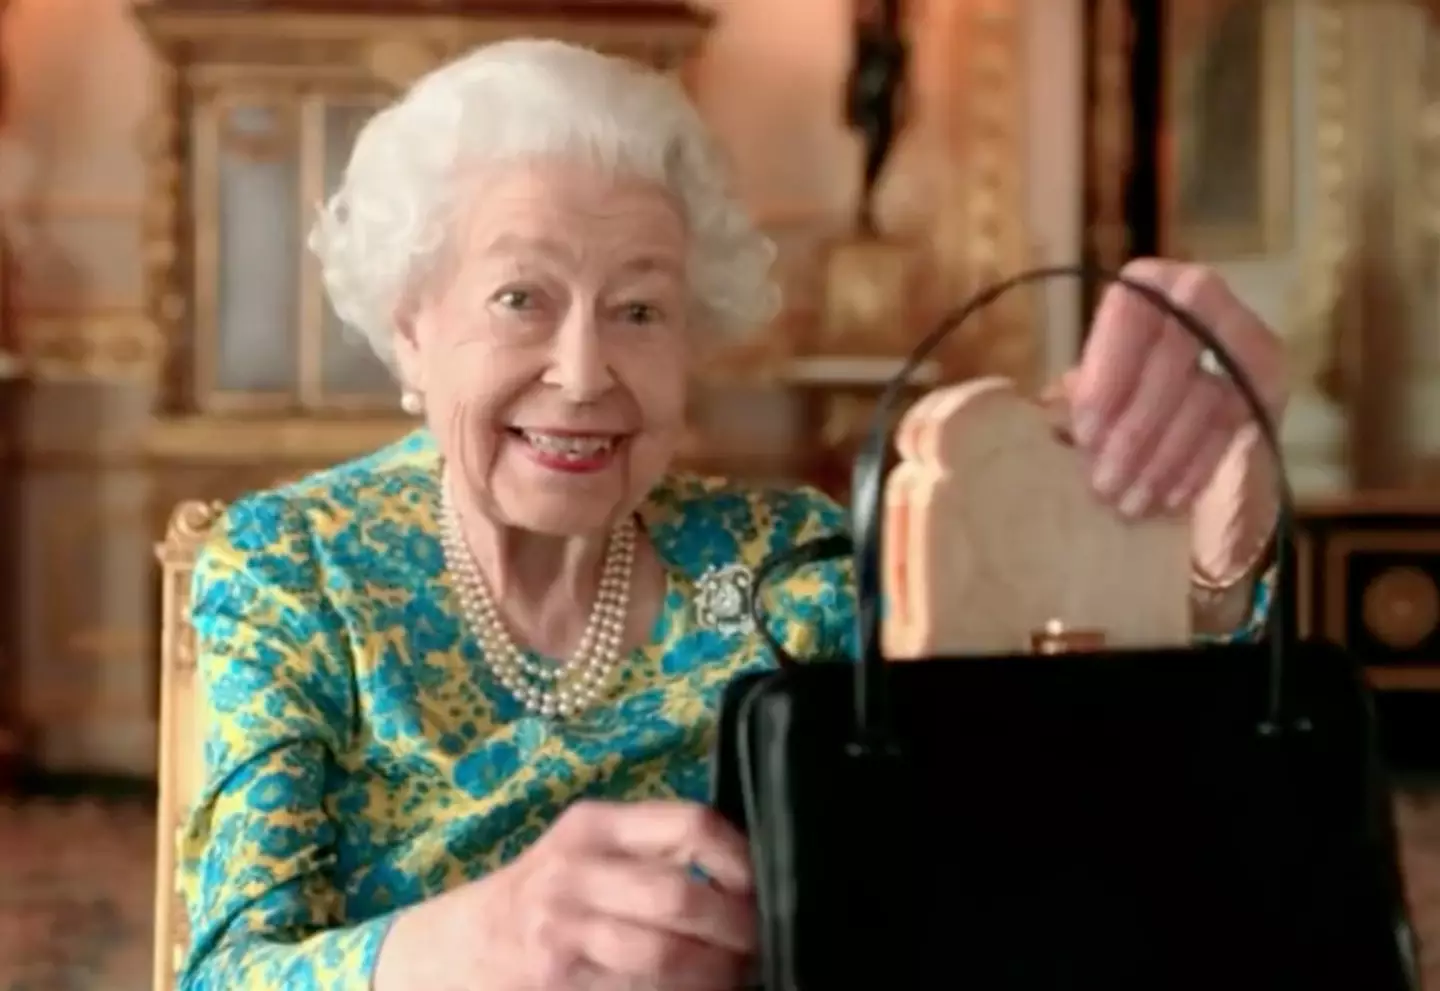 The Queen shared her love of marmalade sandwiches with Paddington.